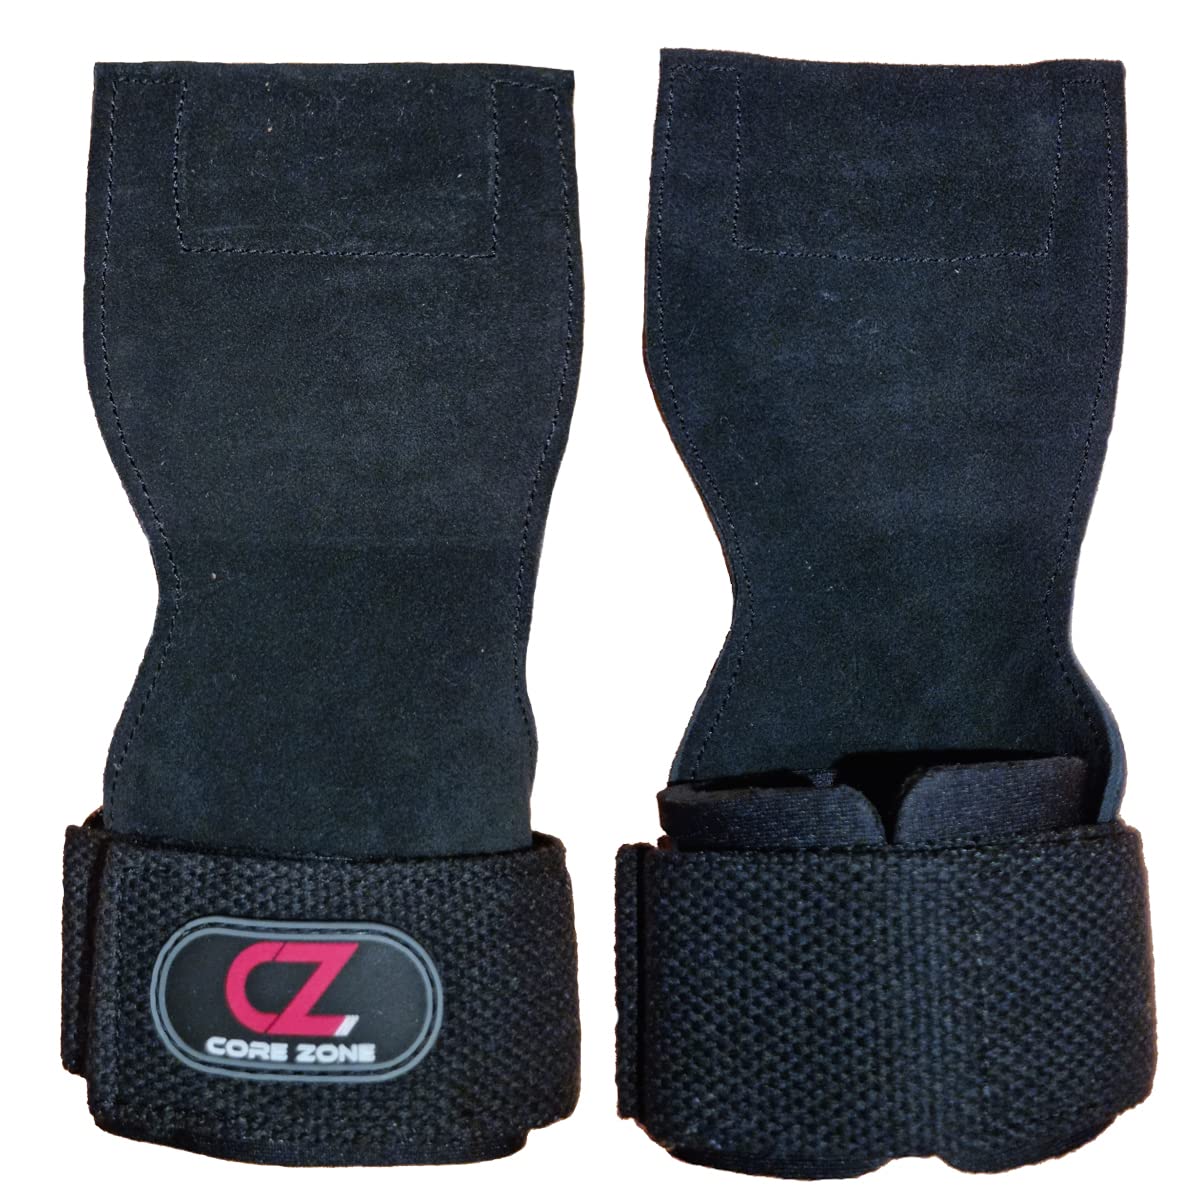 COREZONE Weightlifting Grips With Wrist Wraps | Heavy Duty Lifting Wrist Strap with Neoprene Padding and Cowhide Leather Grip Power Pads For Workout, Deadlift, Powerlifting, Bodybuilding